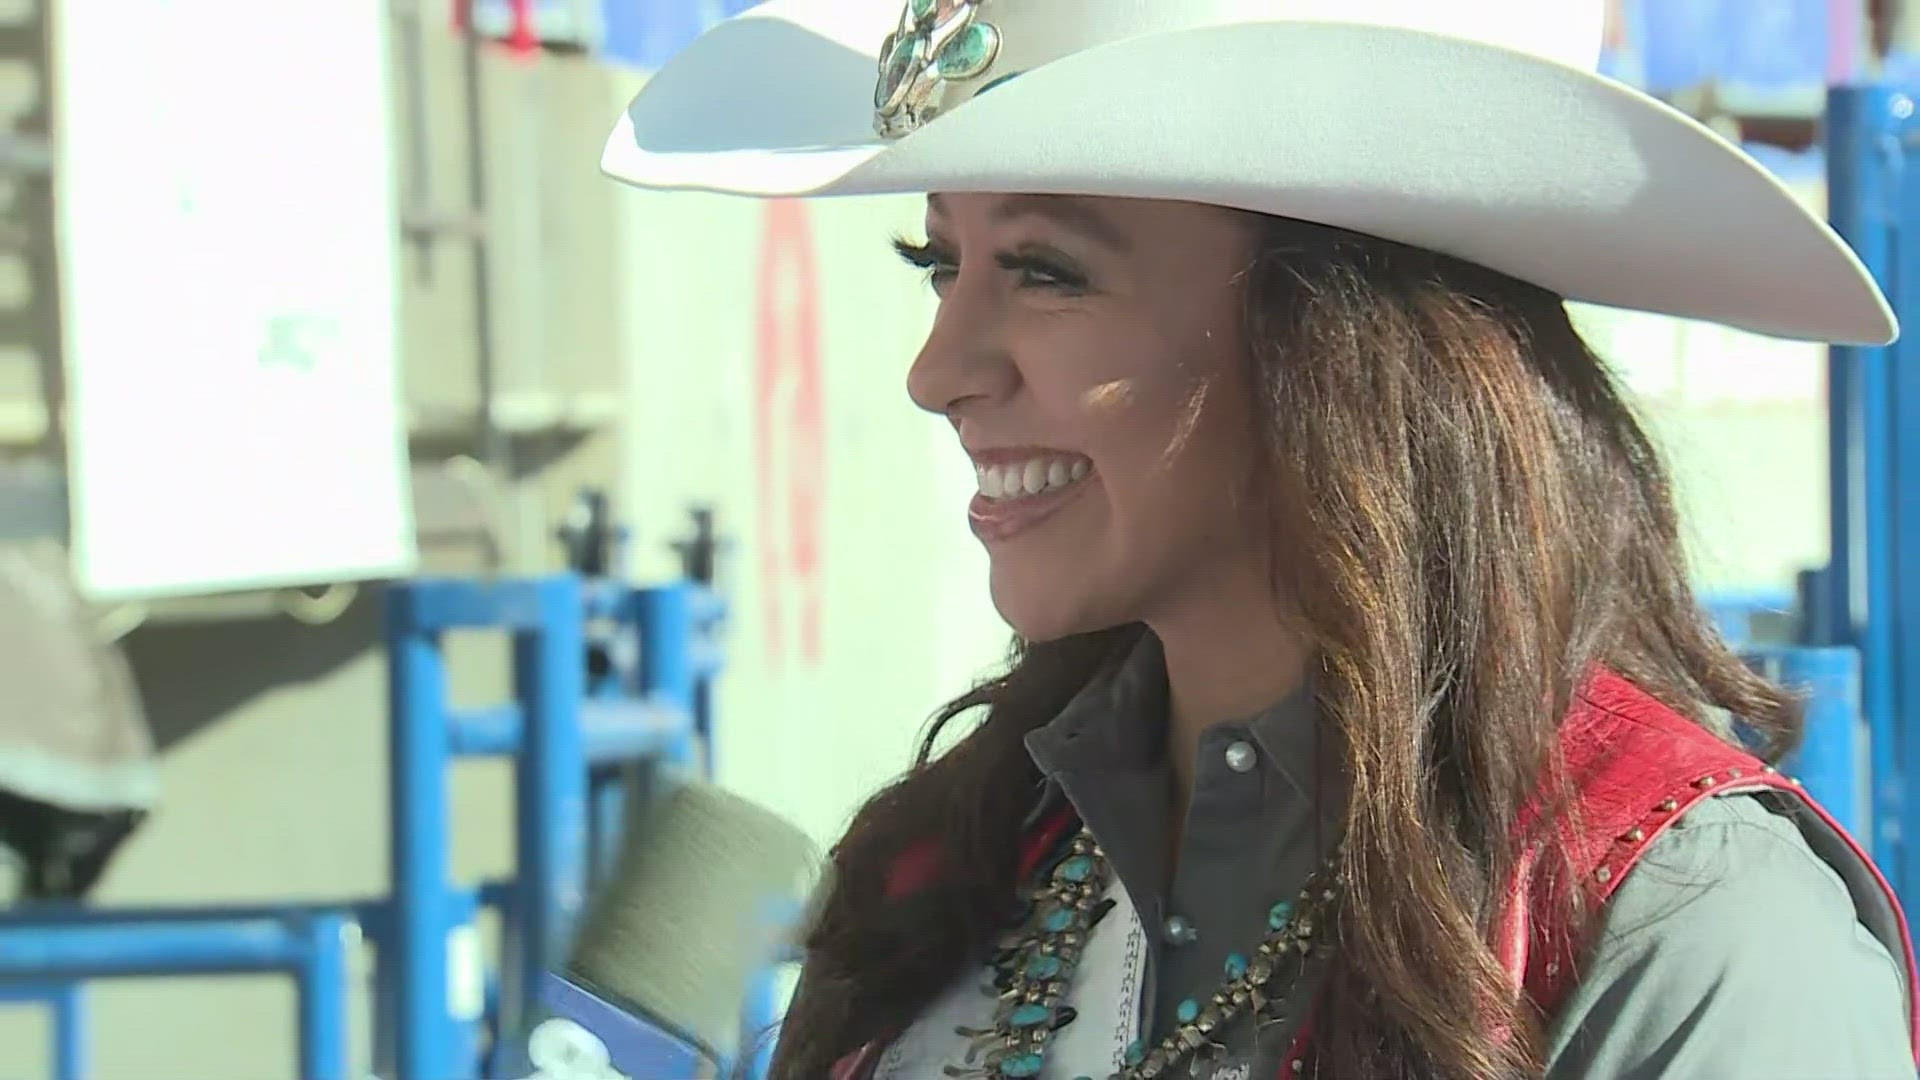 It wouldn't be the start of summer without the Greeley Stampede! Miss Rodeo Colorado 2023 Randilyn Madison previews the fun at the 101st annual event.